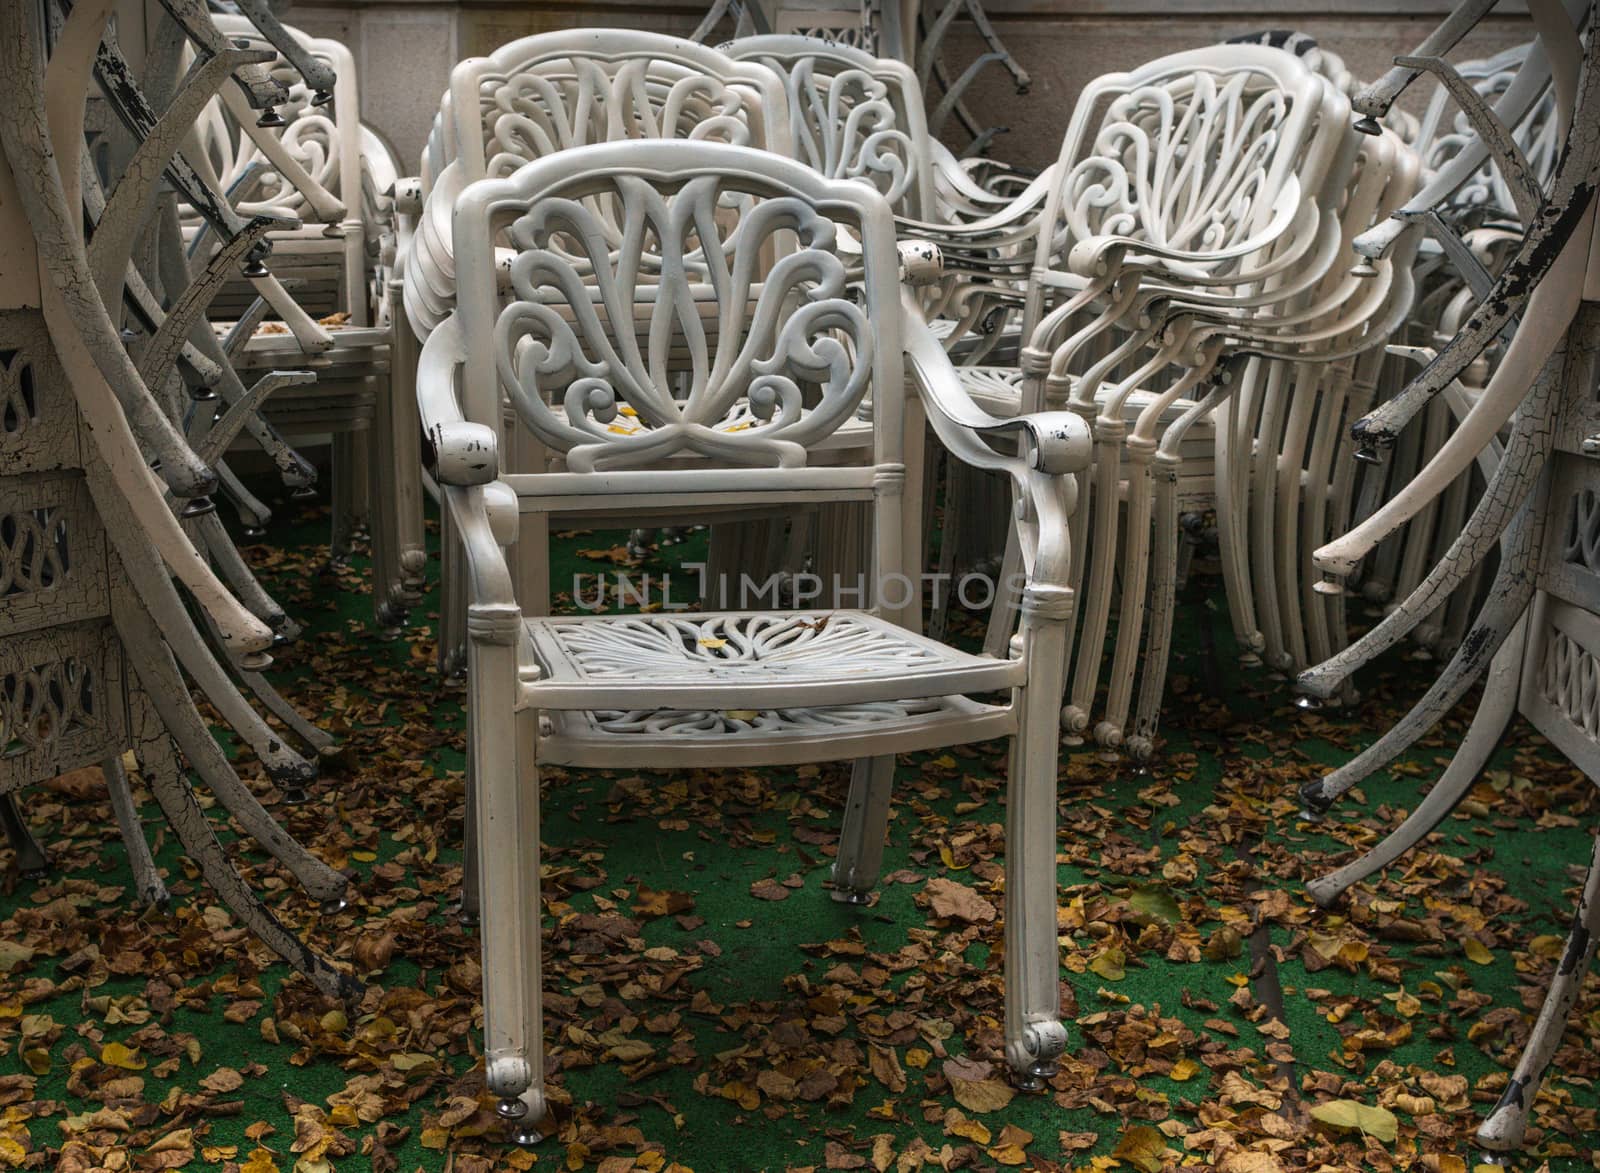 Has come autumn and garden furniture - tables, chairs and armchairs, have relocated from penthouse of restaurant on the backyard.